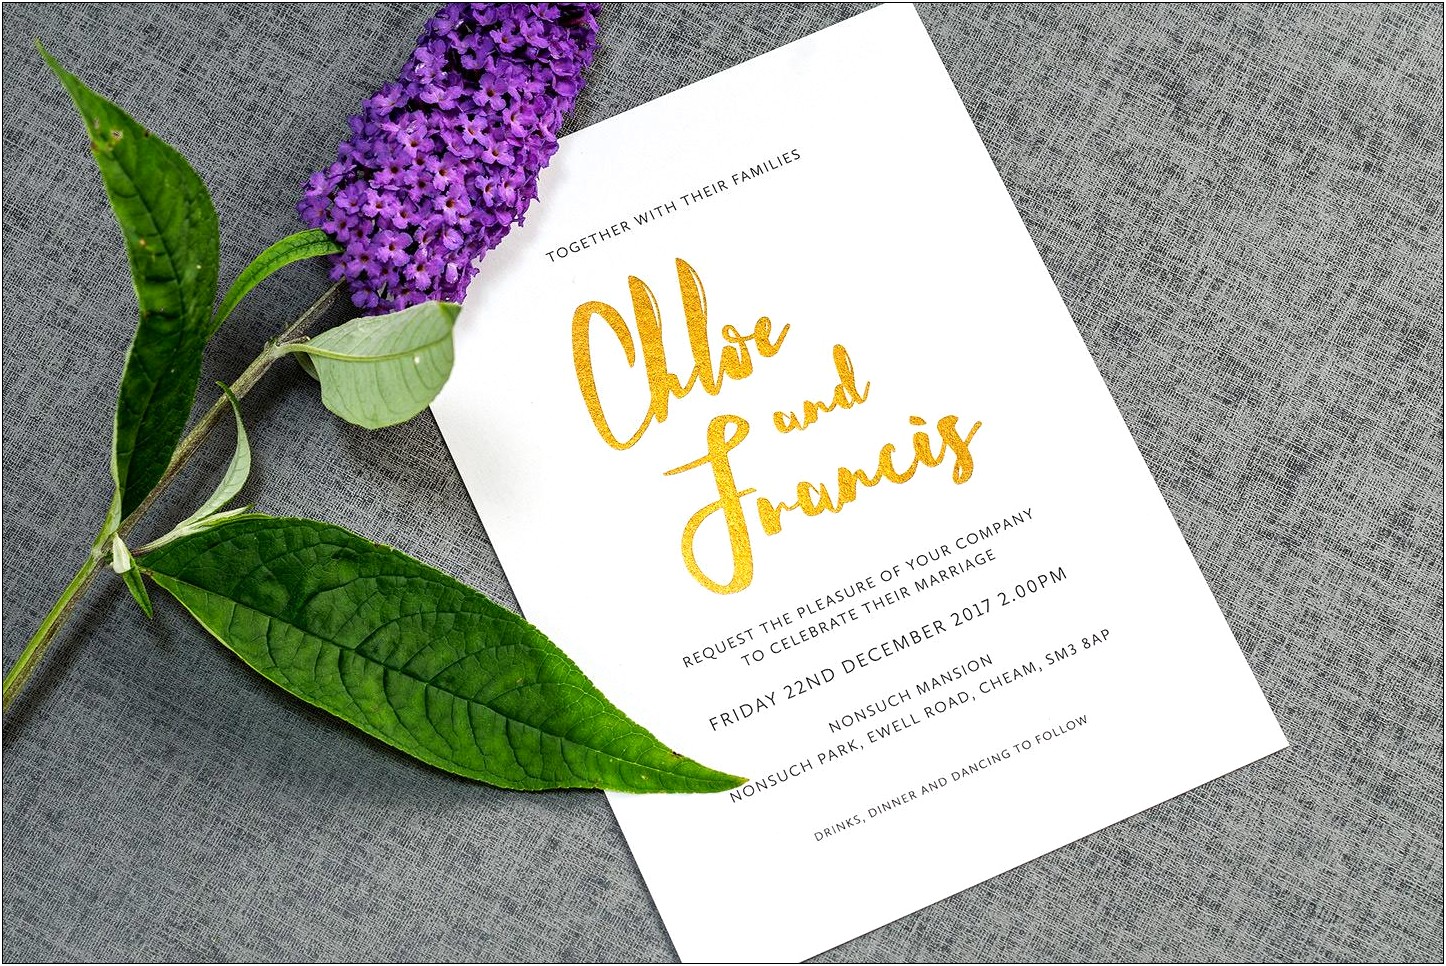 Can You Hand Write Your Wedding Invitations